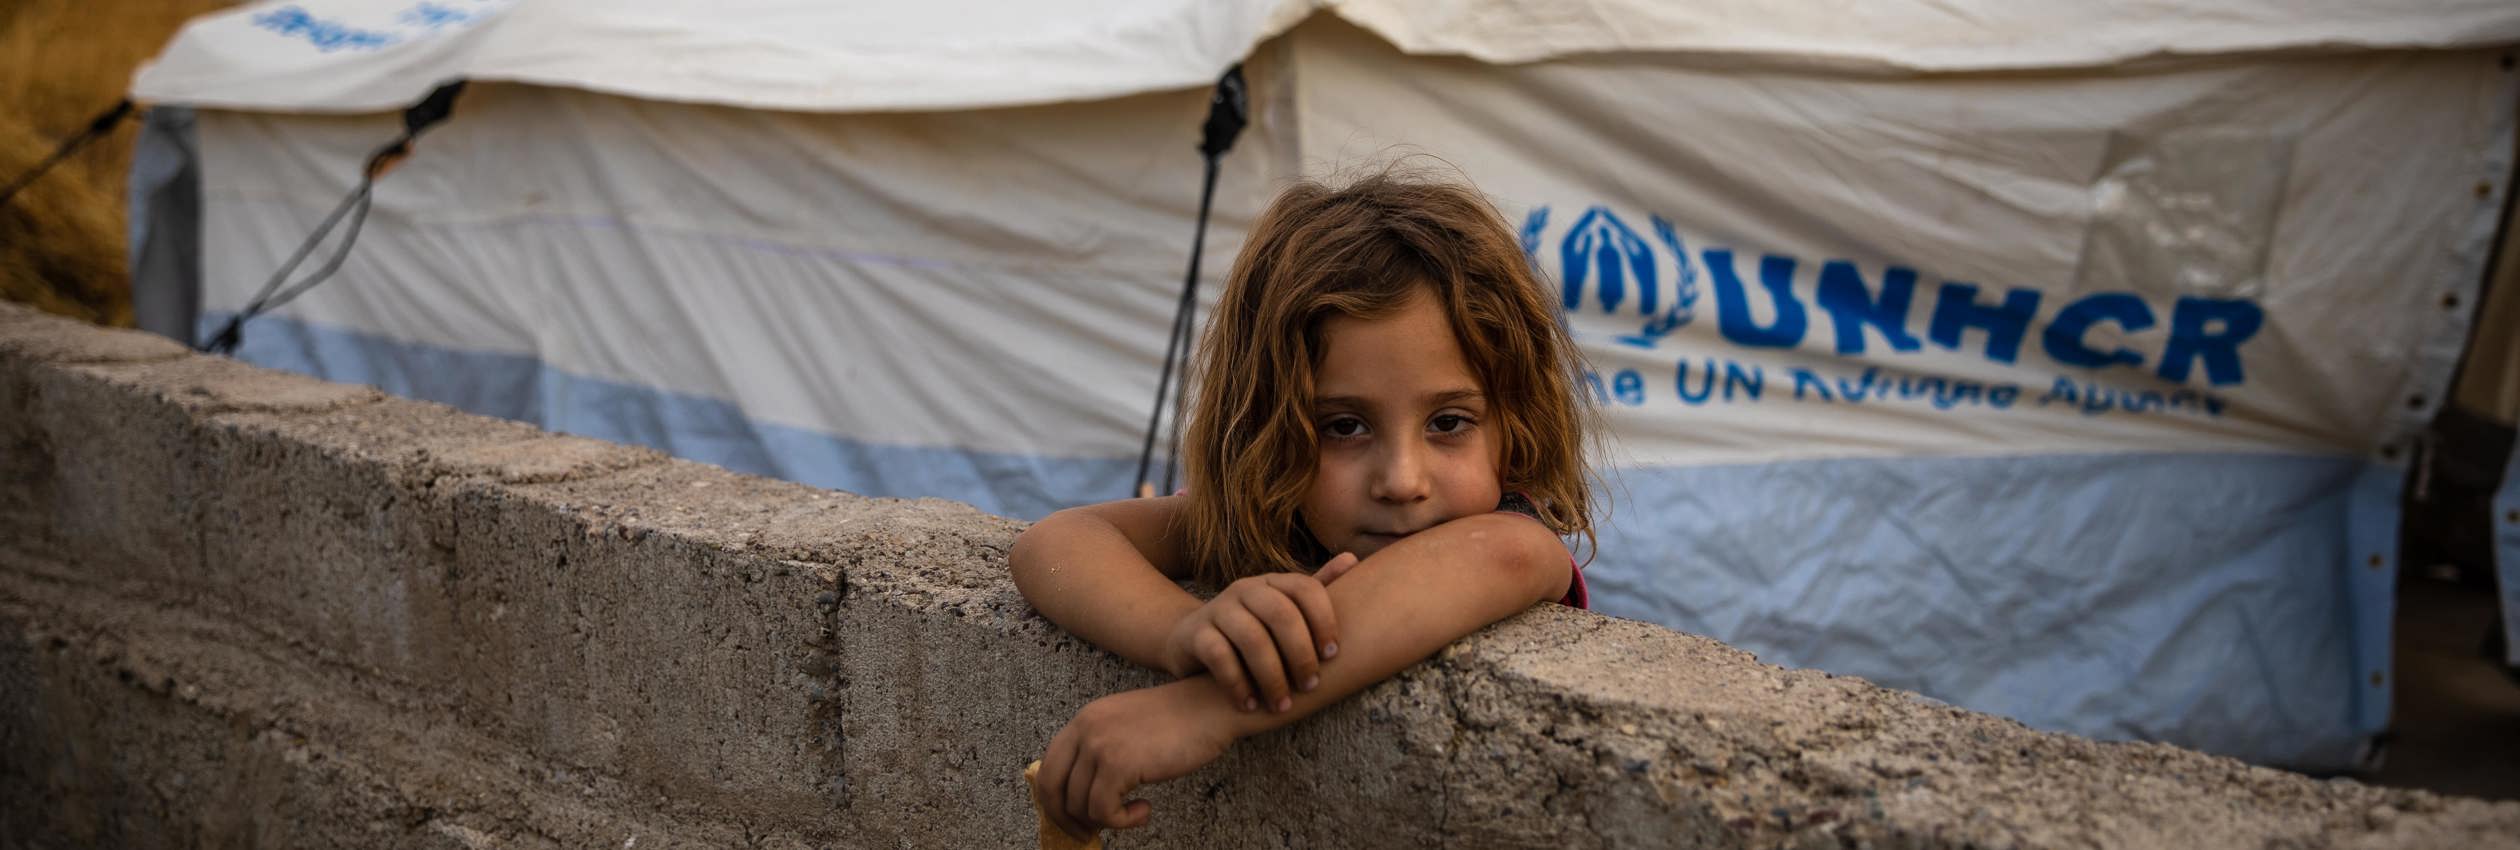 Eight-year-old Raghda Abbas Suleiman looks over a wall near her shelter at Bardarash camp in Duhok, Iraq, a day after arriving with her family.